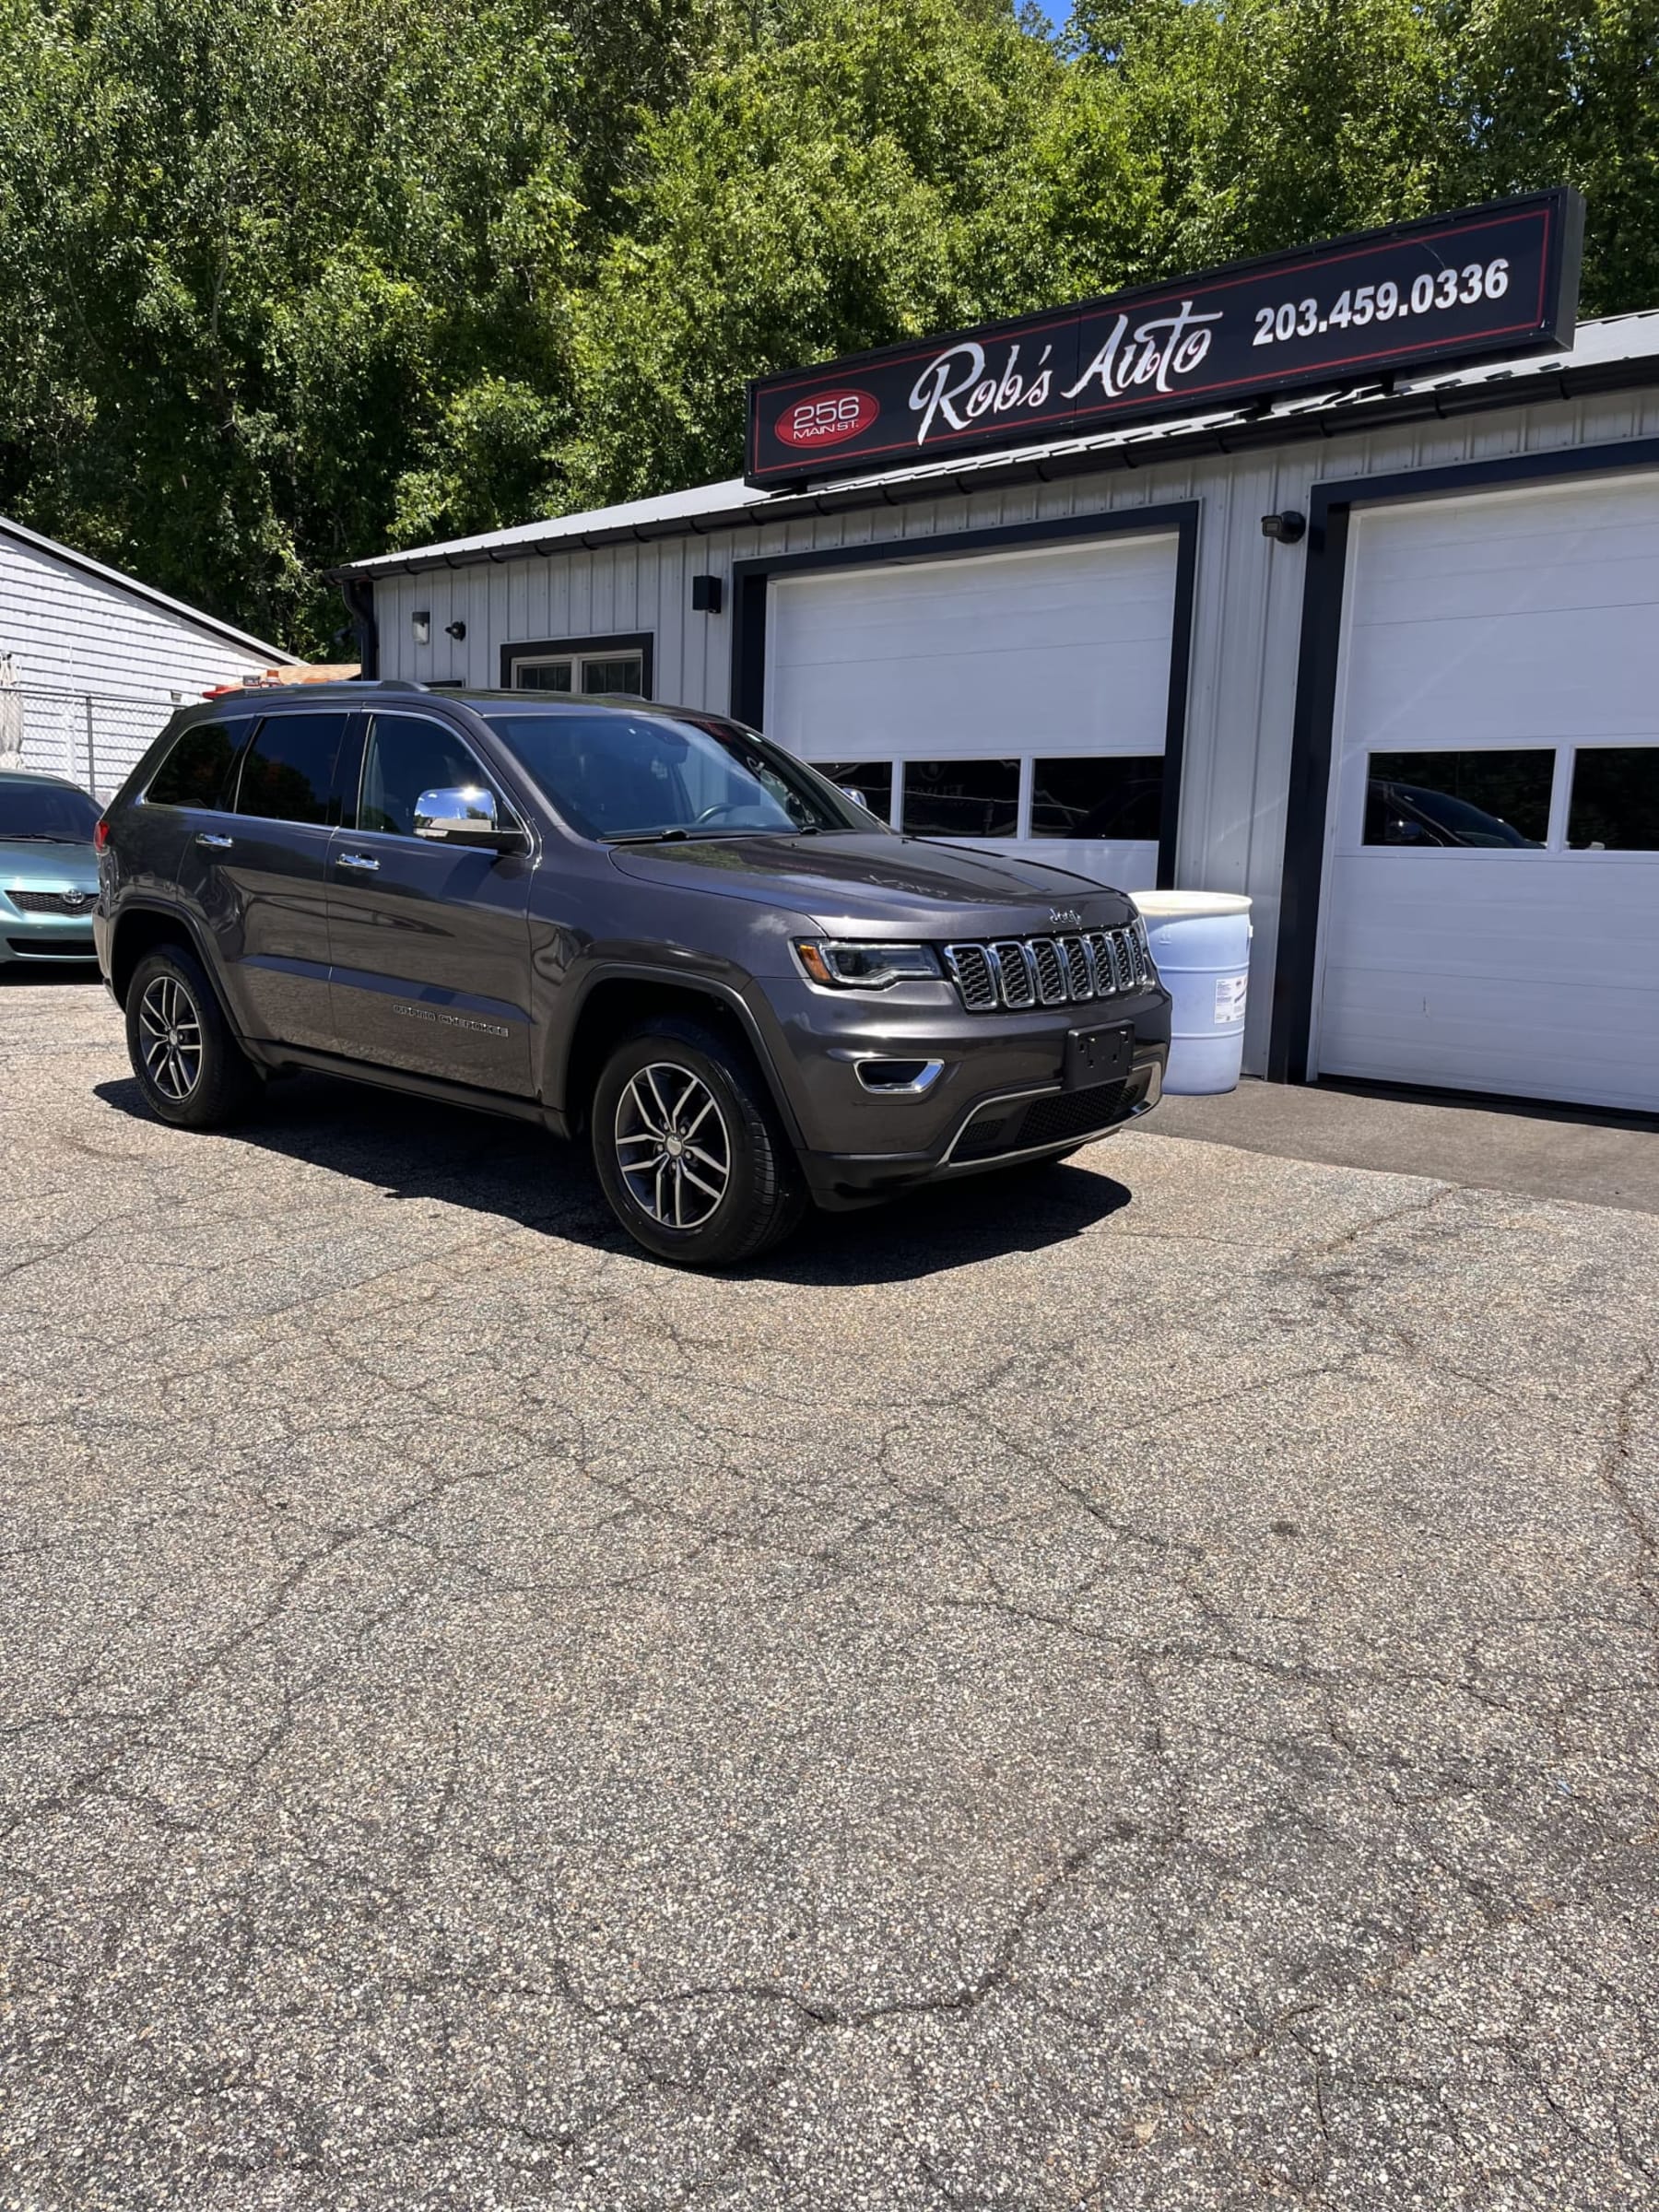 NEW ARRIVAL!! 2017 Jeep Grand Cherokee Limited!! Luxury II group! Loaded with navigation, panoramic roof, heated and cooled leather seats, heated rear seats , remote start, Bluetooth, backup camera and much much more!! Comes with a one year unlimited mileage warranty!! ONKY 84k miles!! Clean carfax!! Definitely won’t last at only $18,900!!